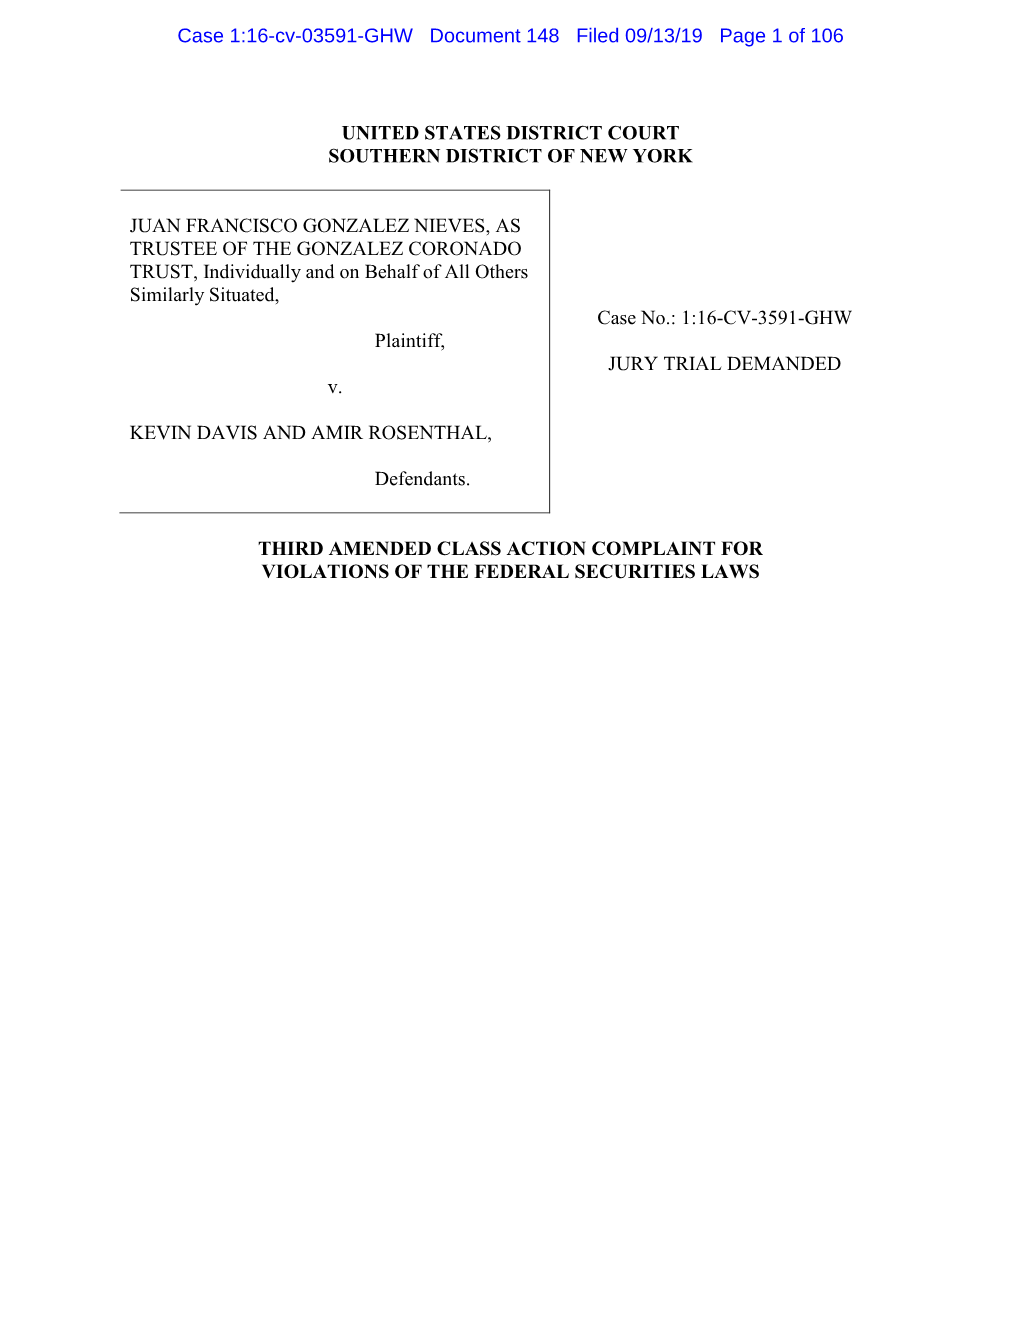 Third Amended Complaint